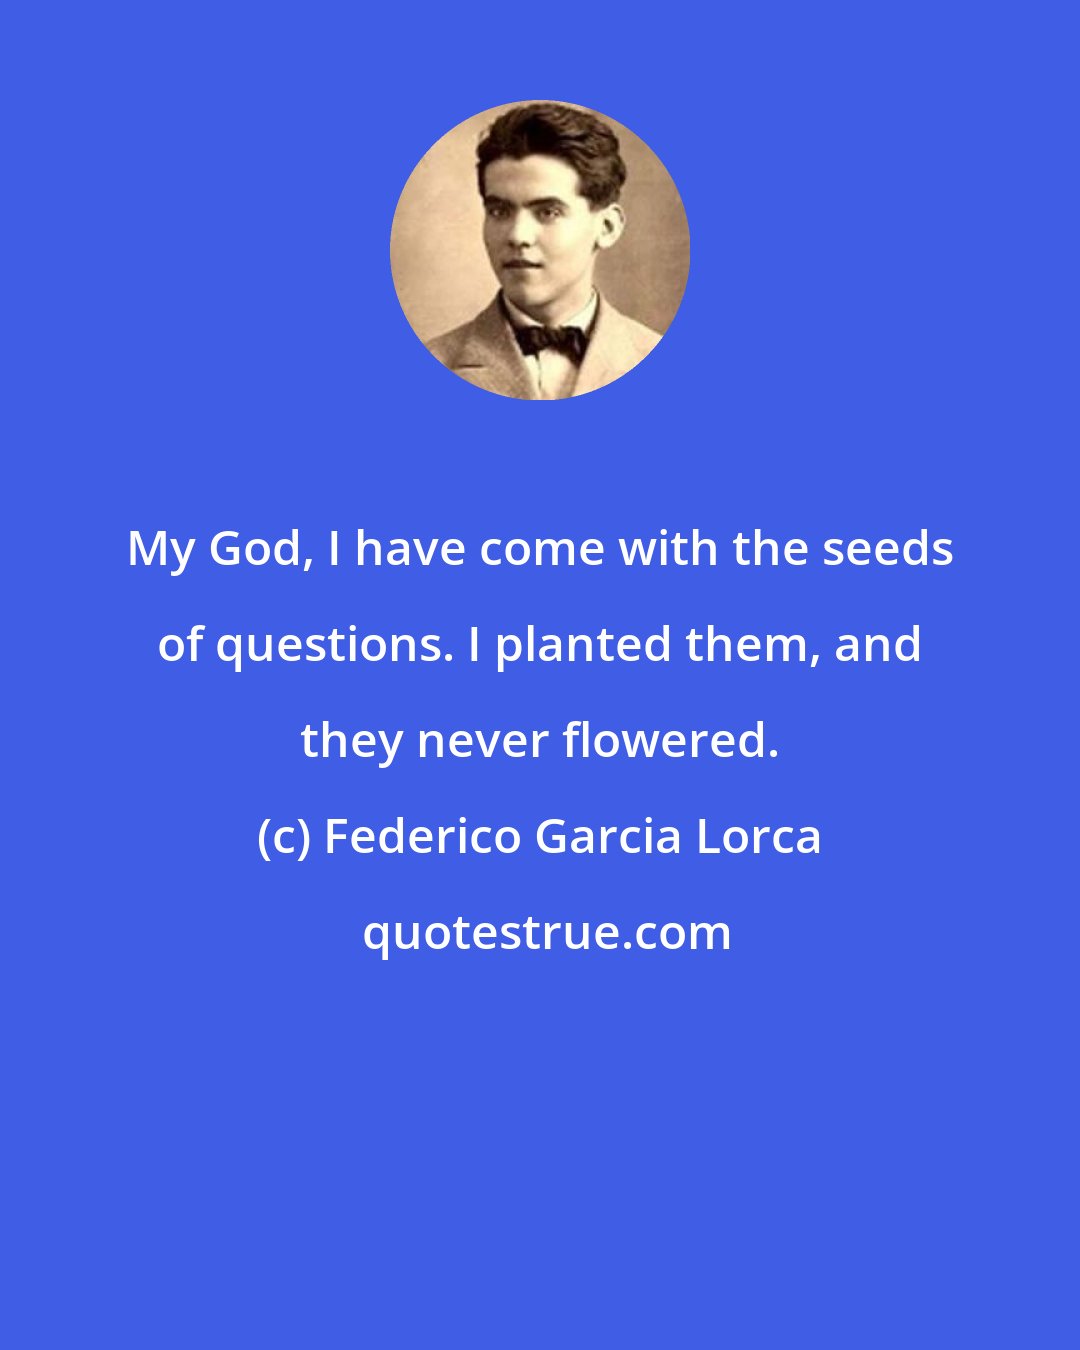 Federico Garcia Lorca: My God, I have come with the seeds of questions. I planted them, and they never flowered.